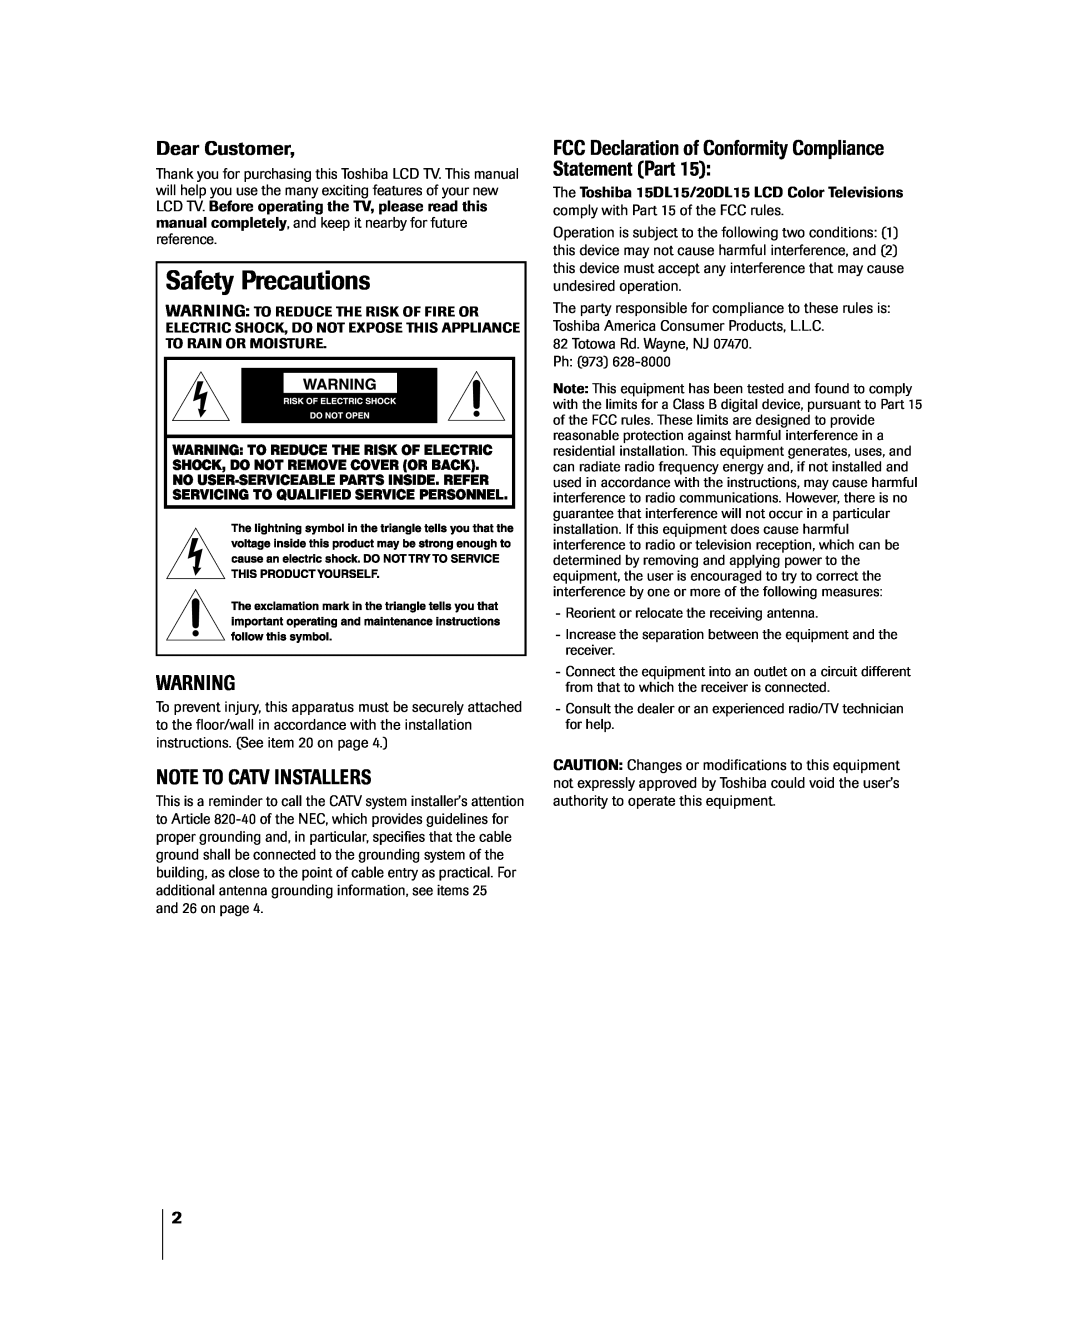 Toshiba 20DL15, 15DL15 owner manual Safety Precautions, Dear Customer, Note To Catv Installers 